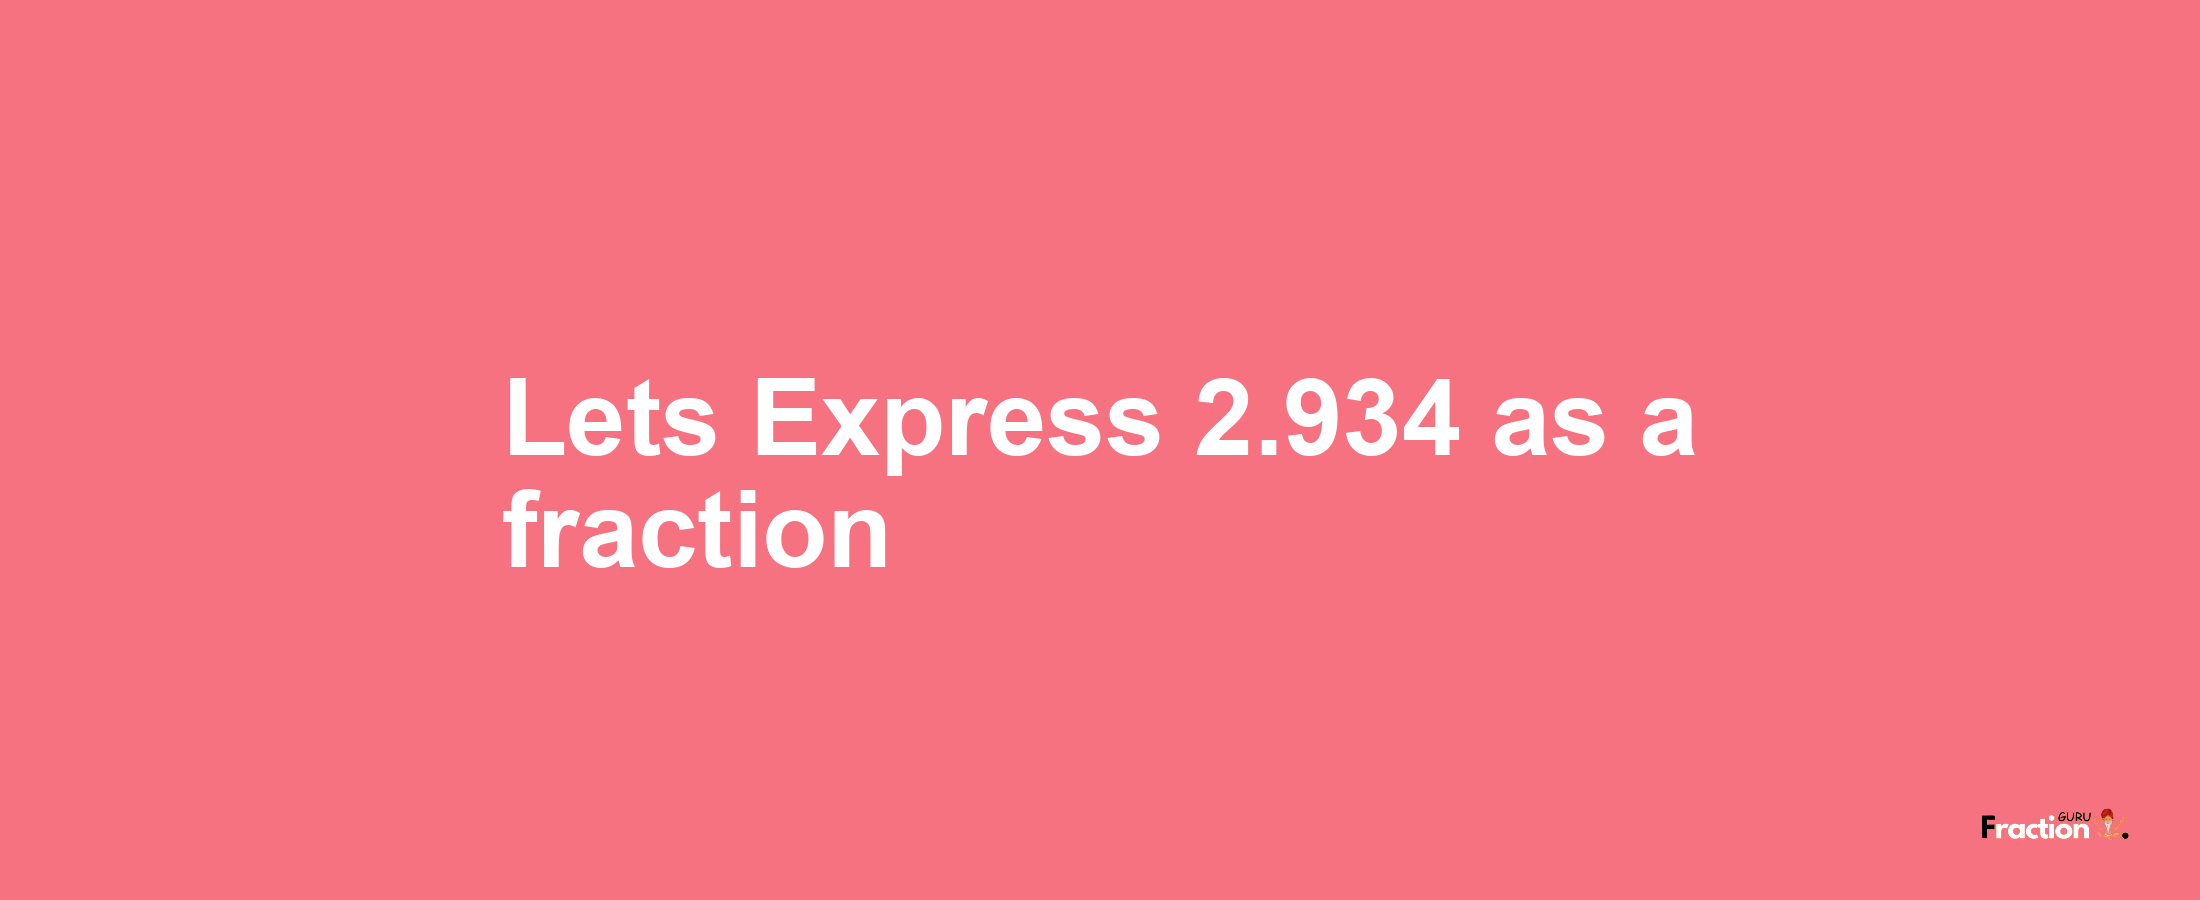 Lets Express 2.934 as afraction